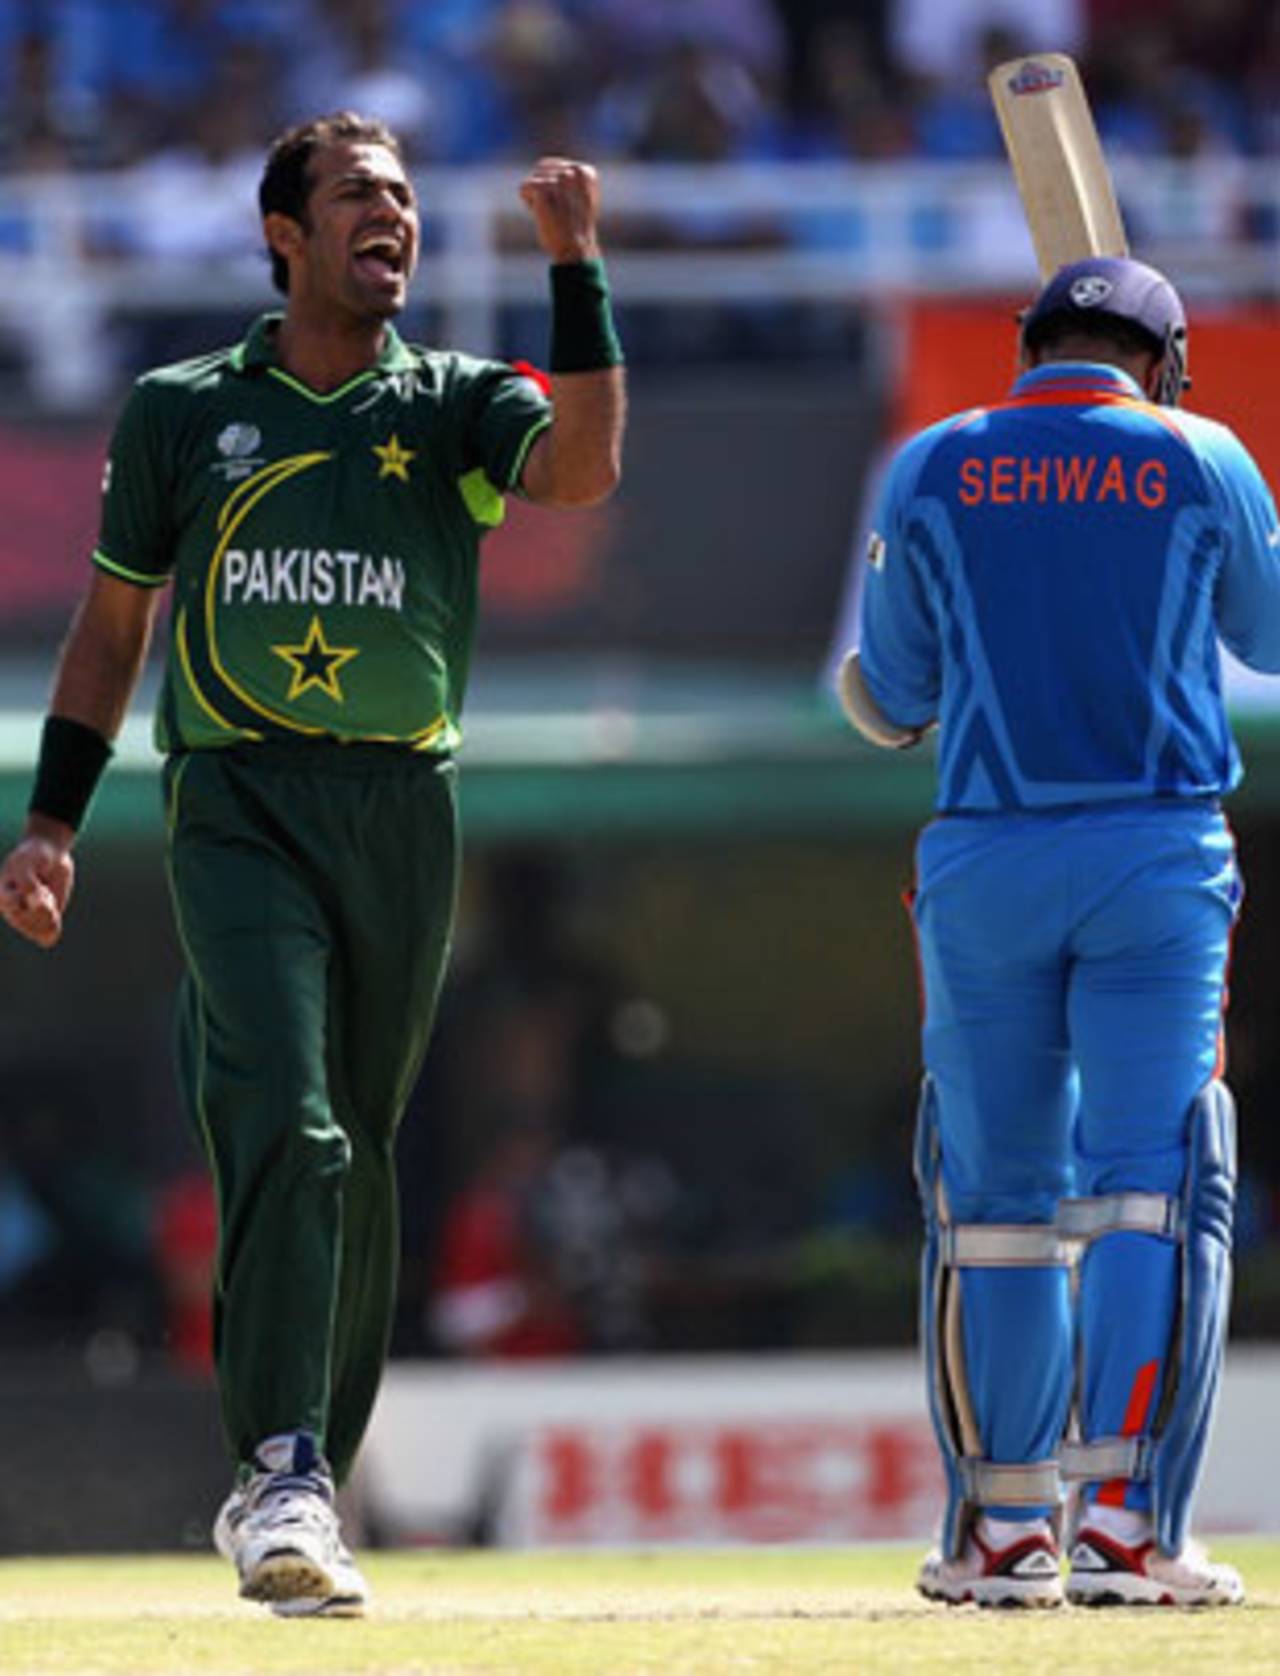 Wahab Riaz celebrates as Virender Sehwag walks off, India v Pakistan, 2nd semi-final, World Cup 2011, Mohali, March 30, 2011